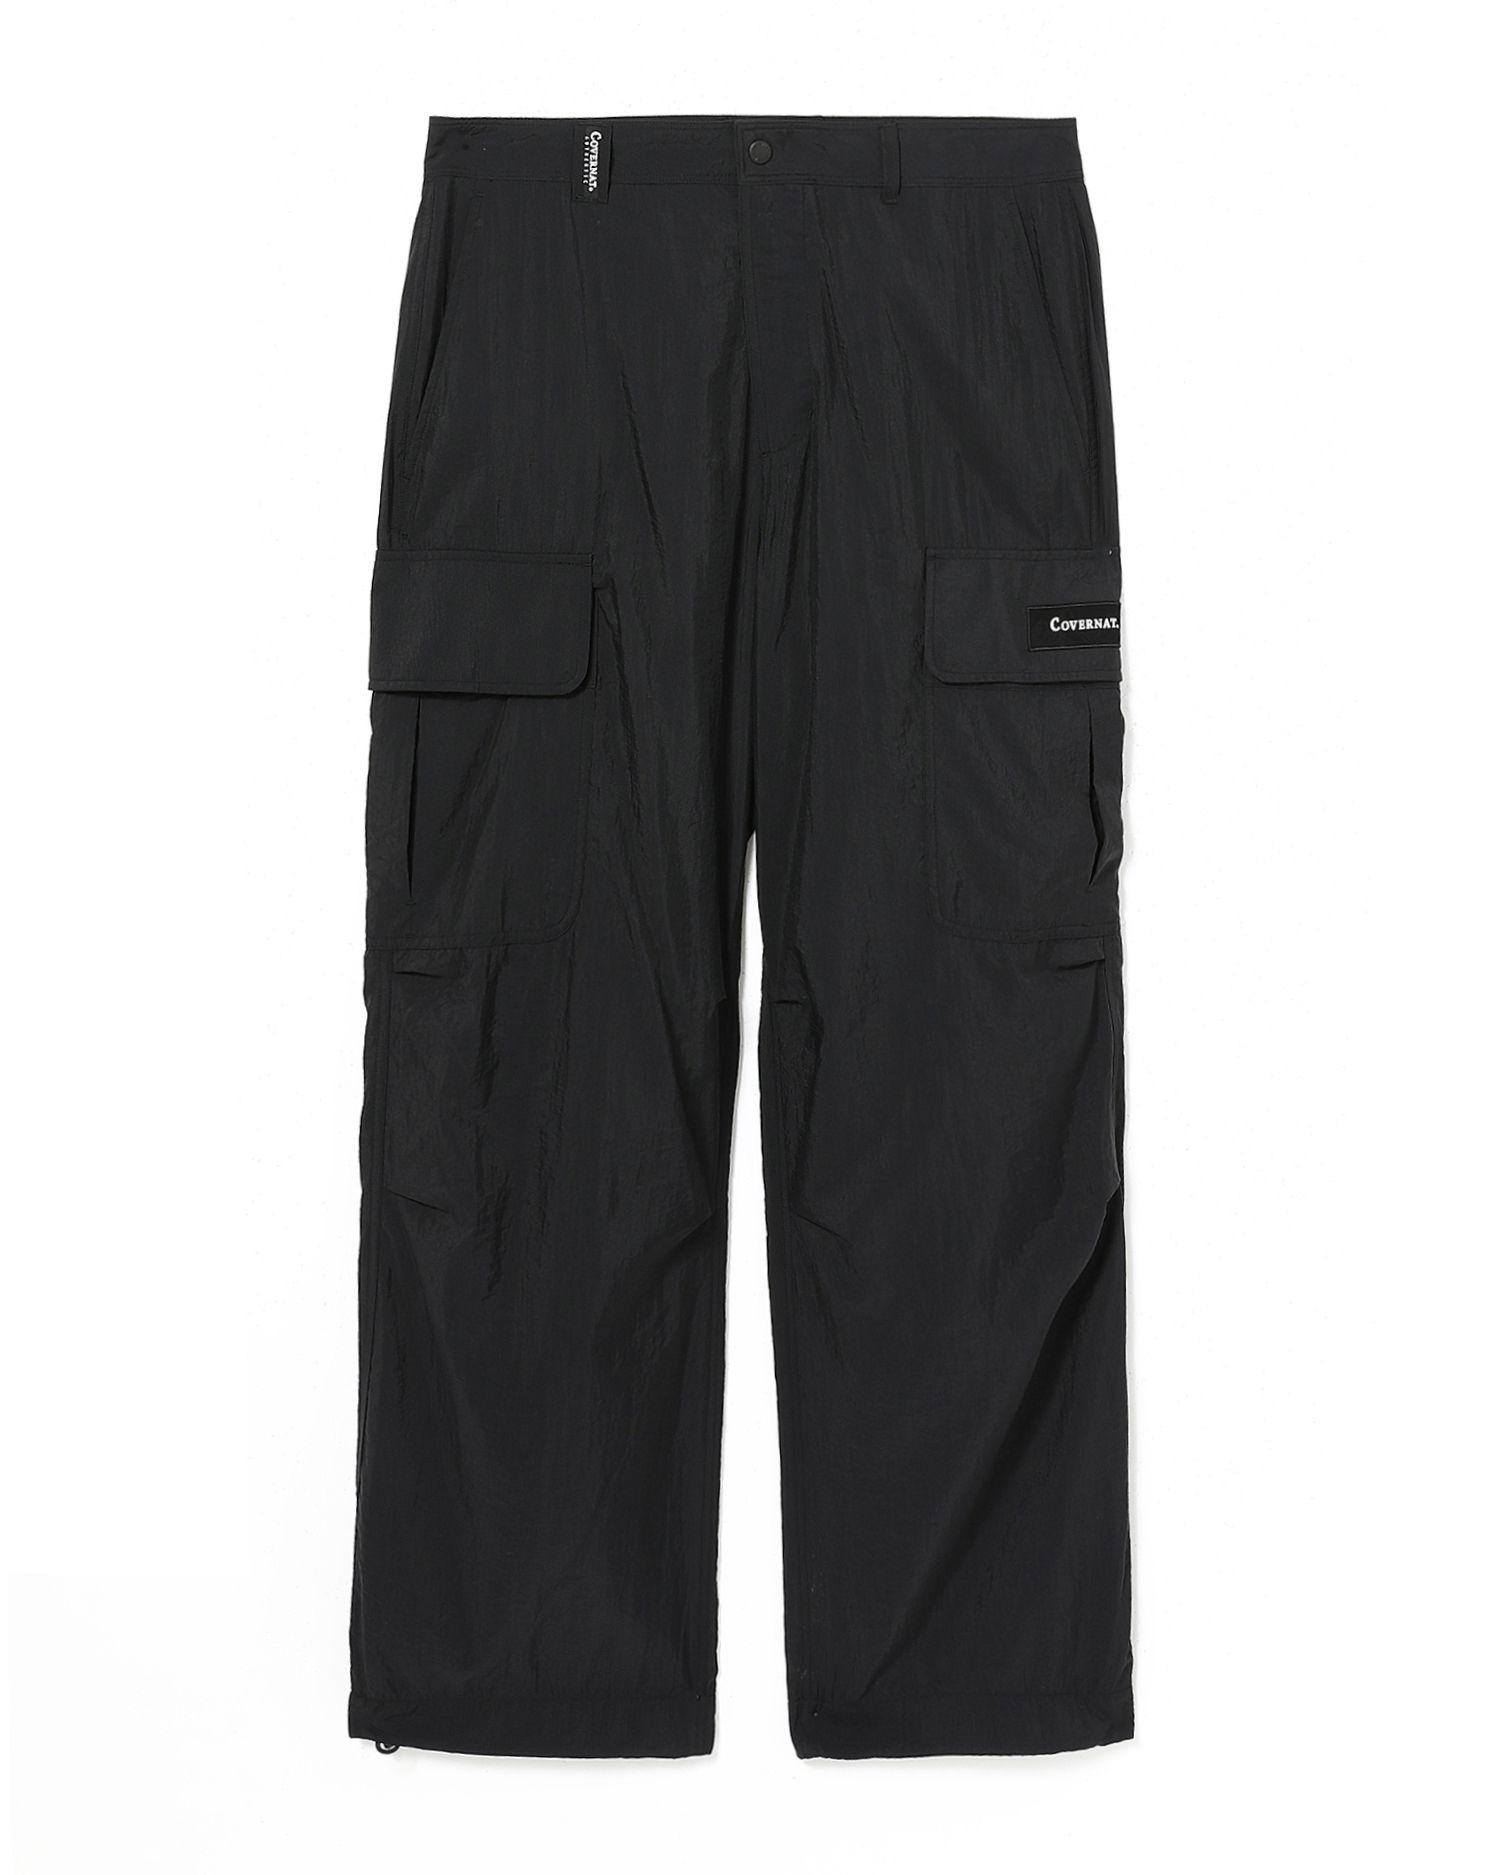 Relaxed logo pants by COVERNAT